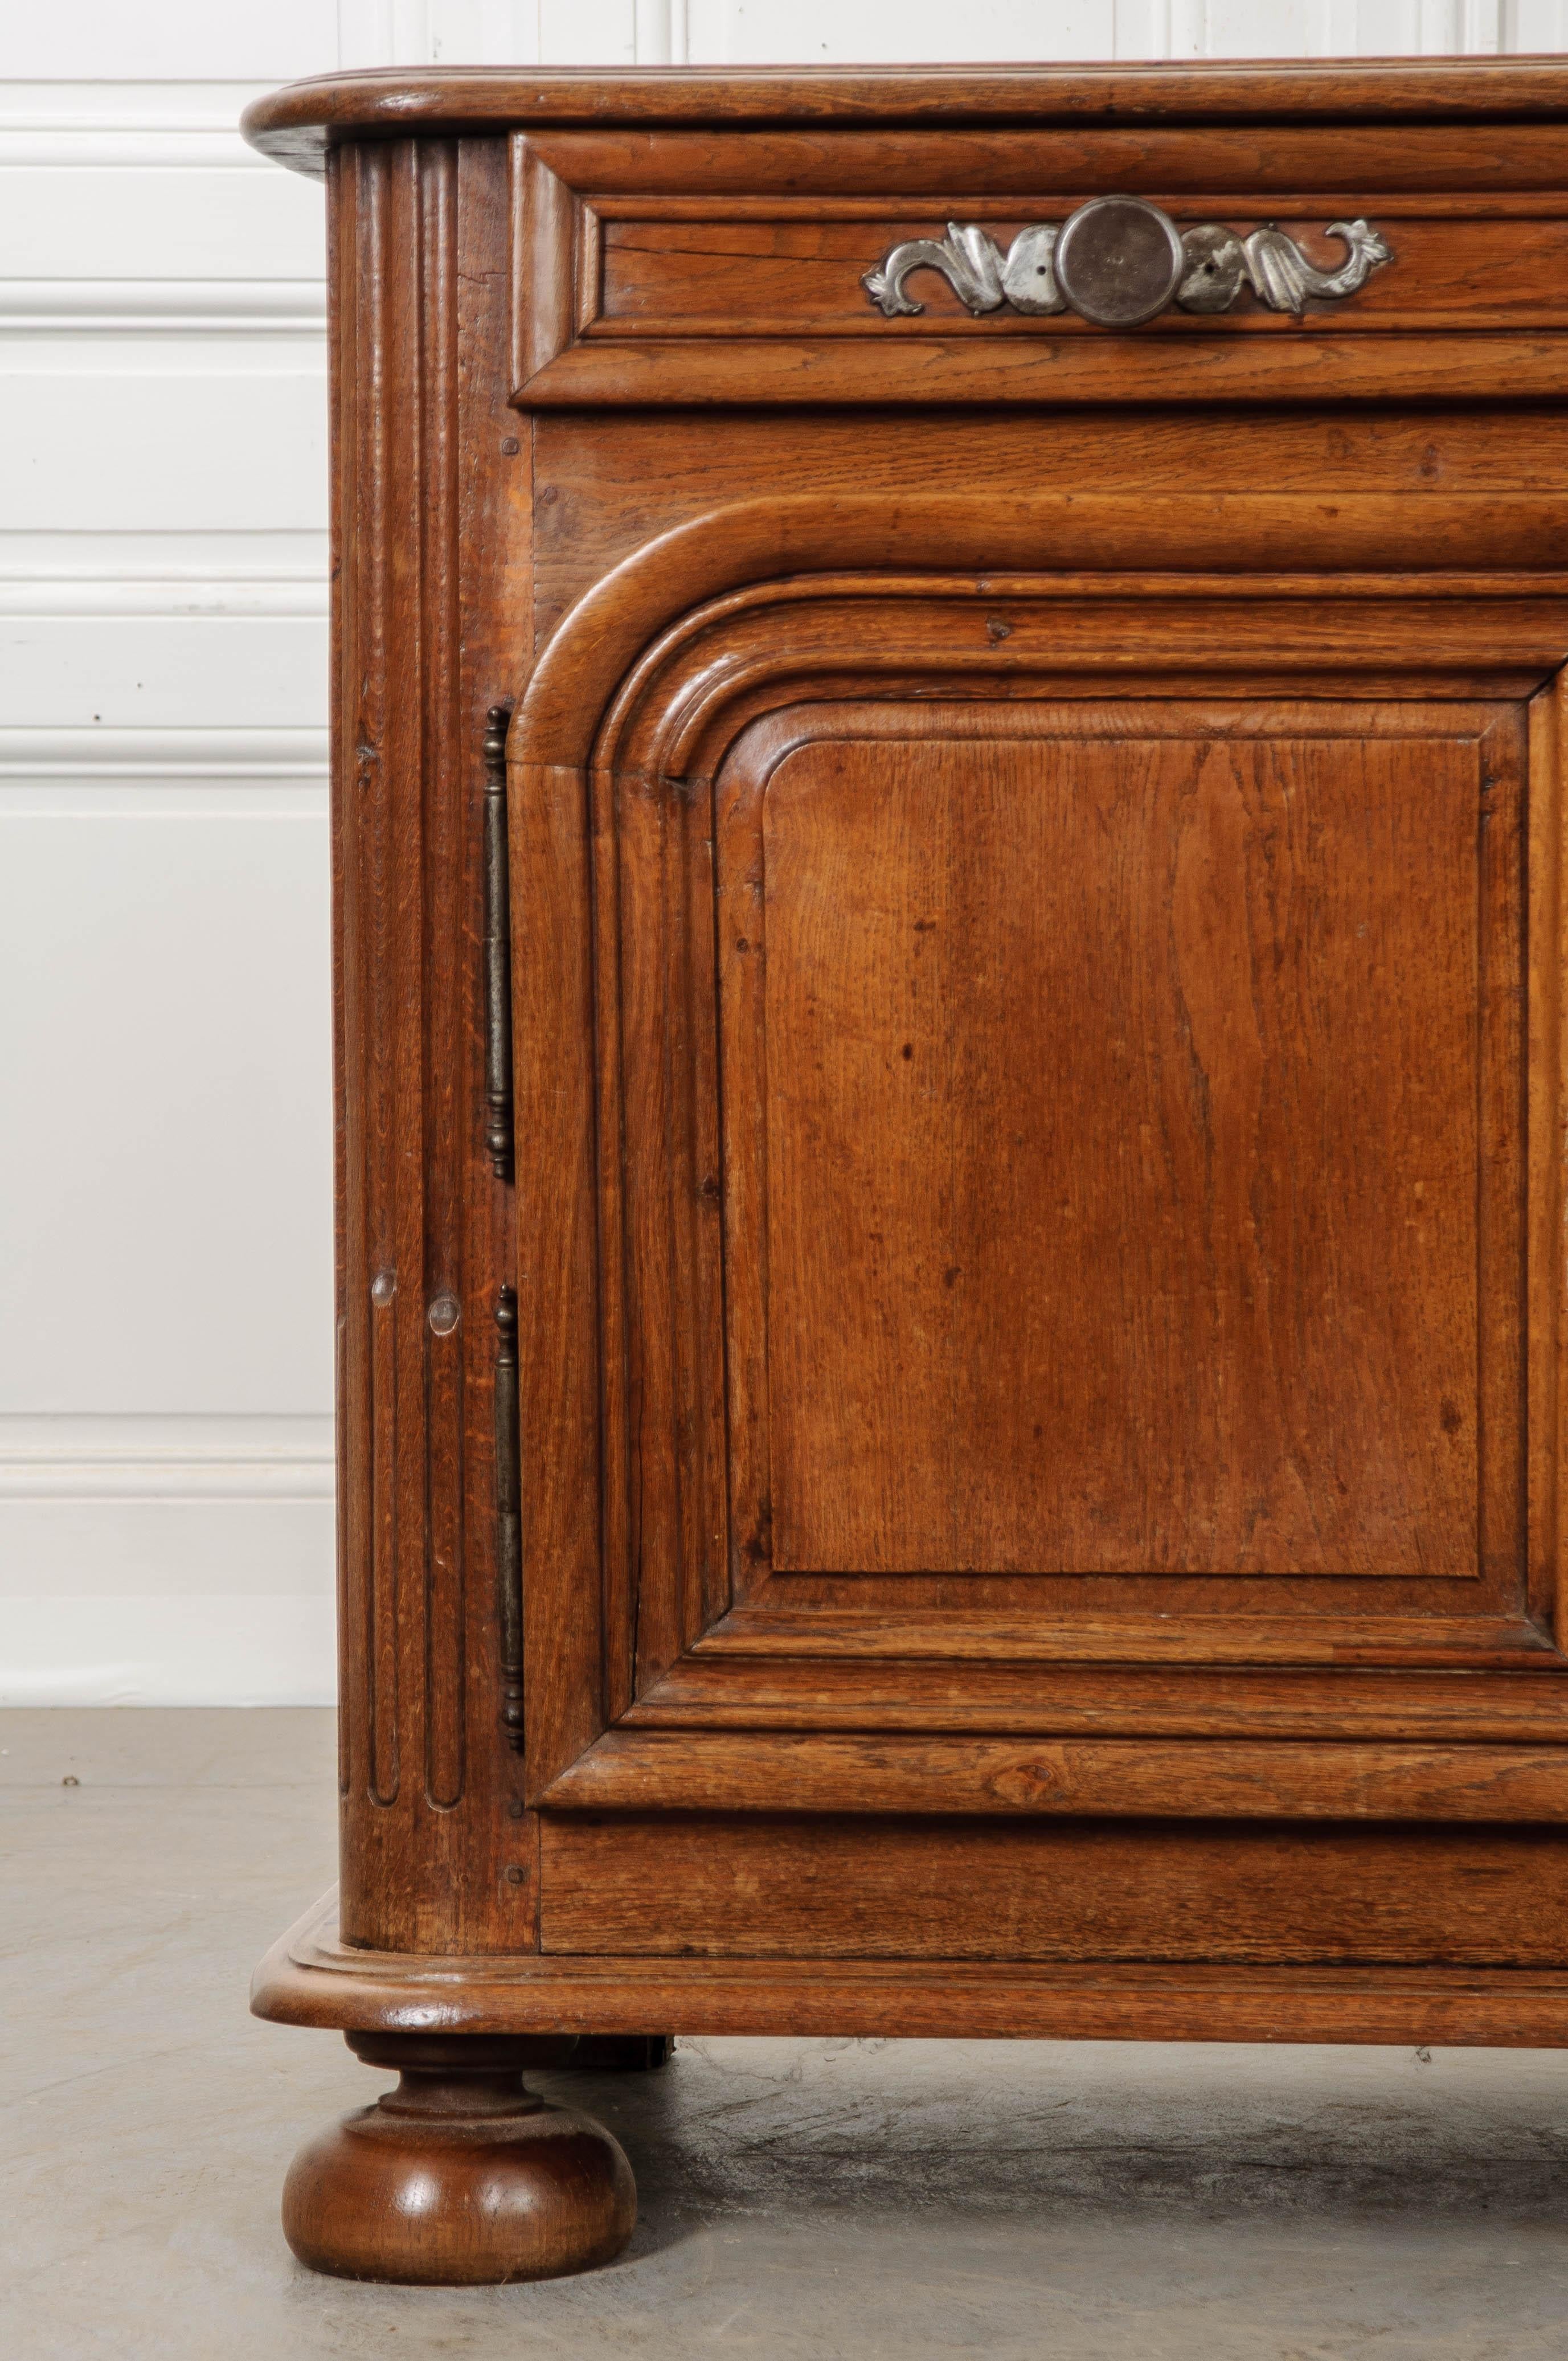 A hefty oak buffet, made in France towards the middle of the 18th century. The buffet has been constructed using thick, sold pieces of milled oak that contribute to the antique’s heft. Rounded corners can be found on the case piece’s fronts and top.